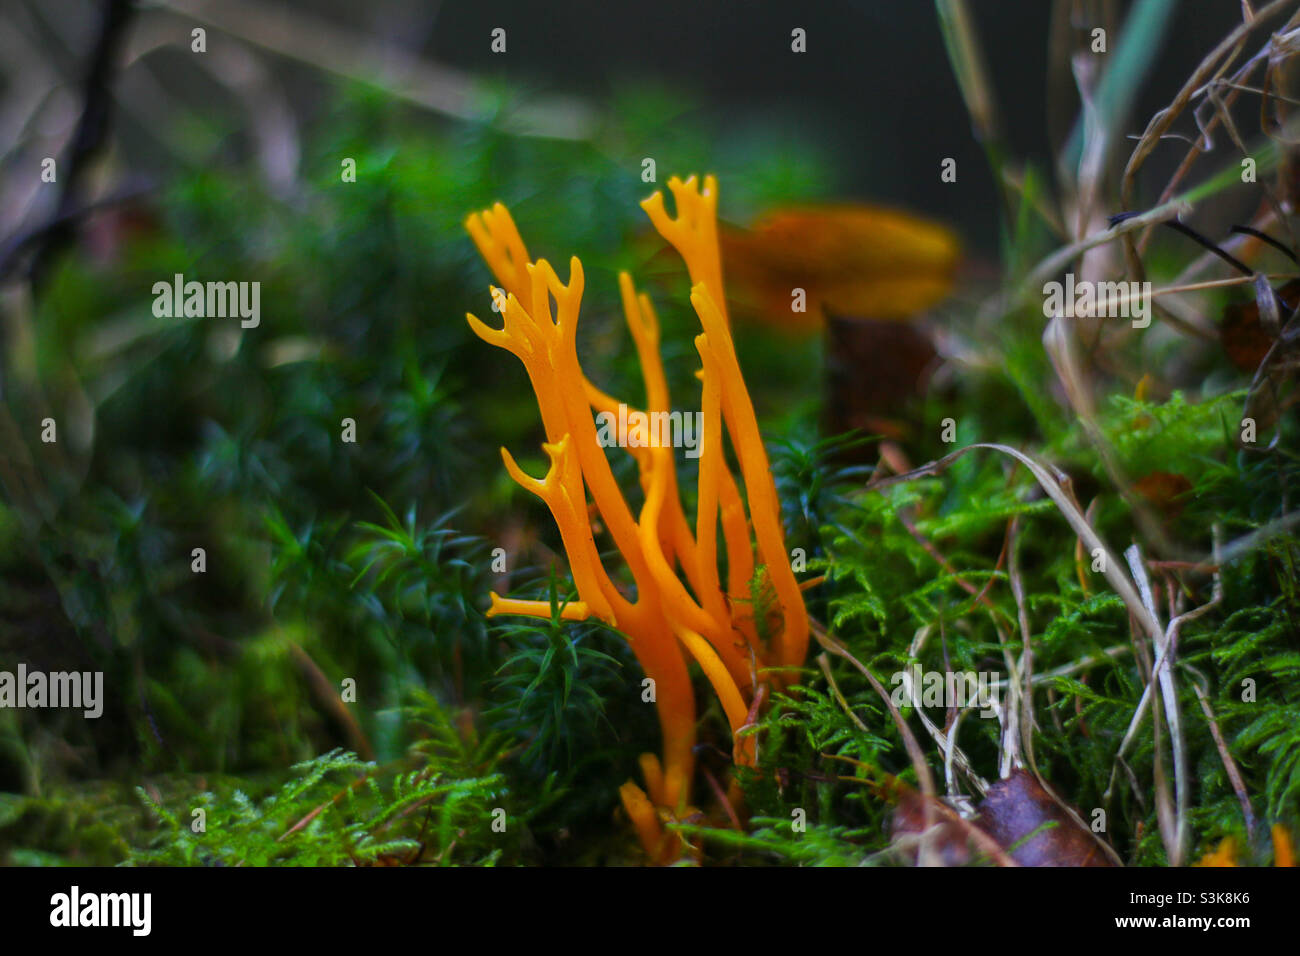 Funghi staghorn gialli Foto Stock